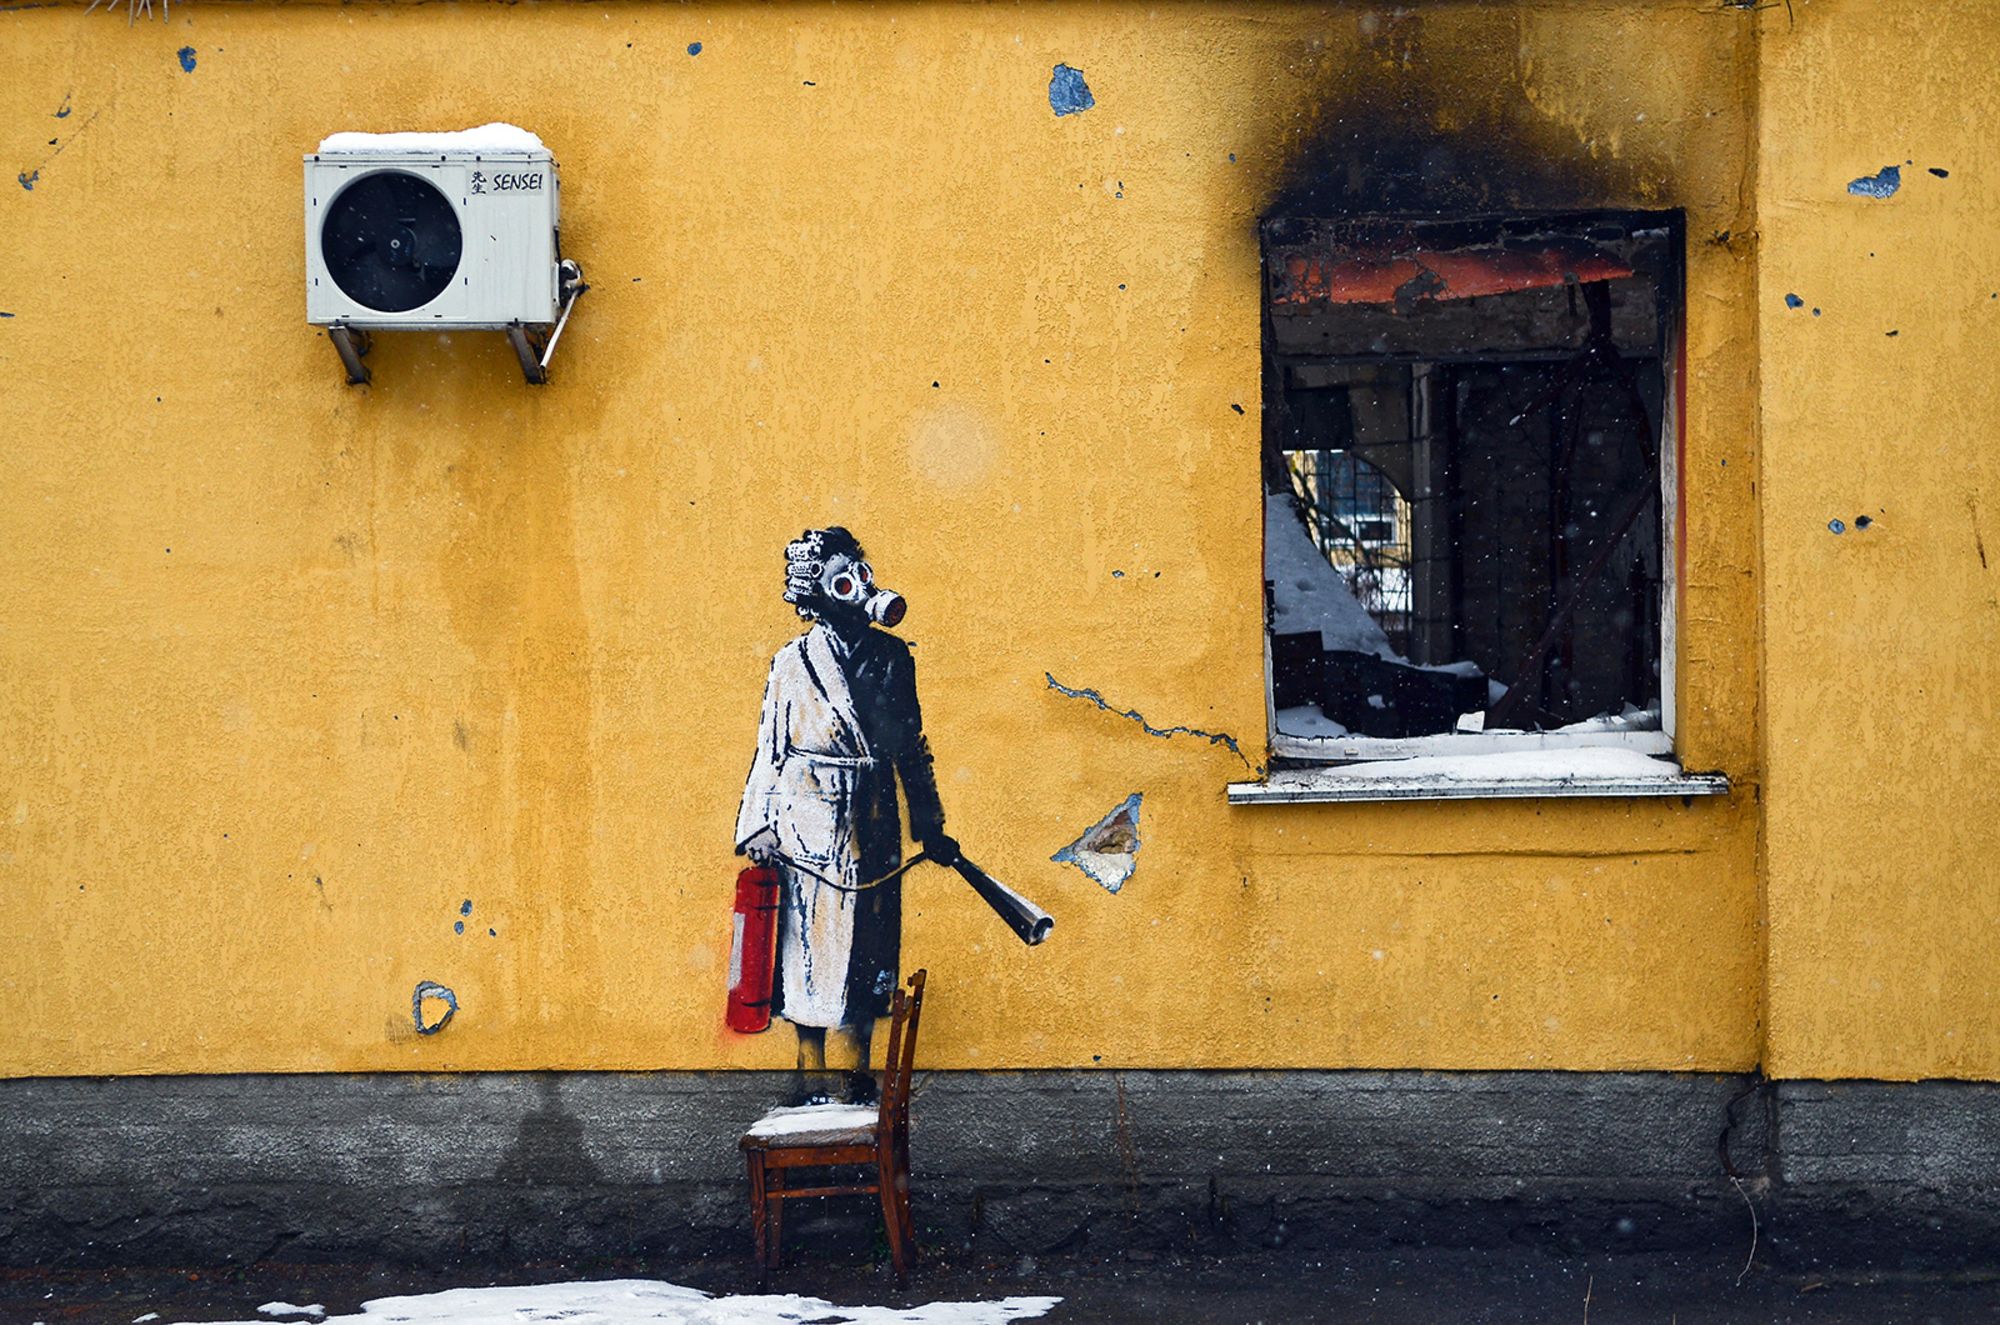 HOSTOMEL, UKRAINE - NOVEMBER 26, 2022 - The mural by England-based street artist Banksy depicts a woman in a gas mask standing on a chair and holding a fire extinguisher, Hostomel, Kyiv Region, northern Ukraine. (Photo credit should read Oleksandra Butova / Ukrinform/Future Publishing via Getty Images)